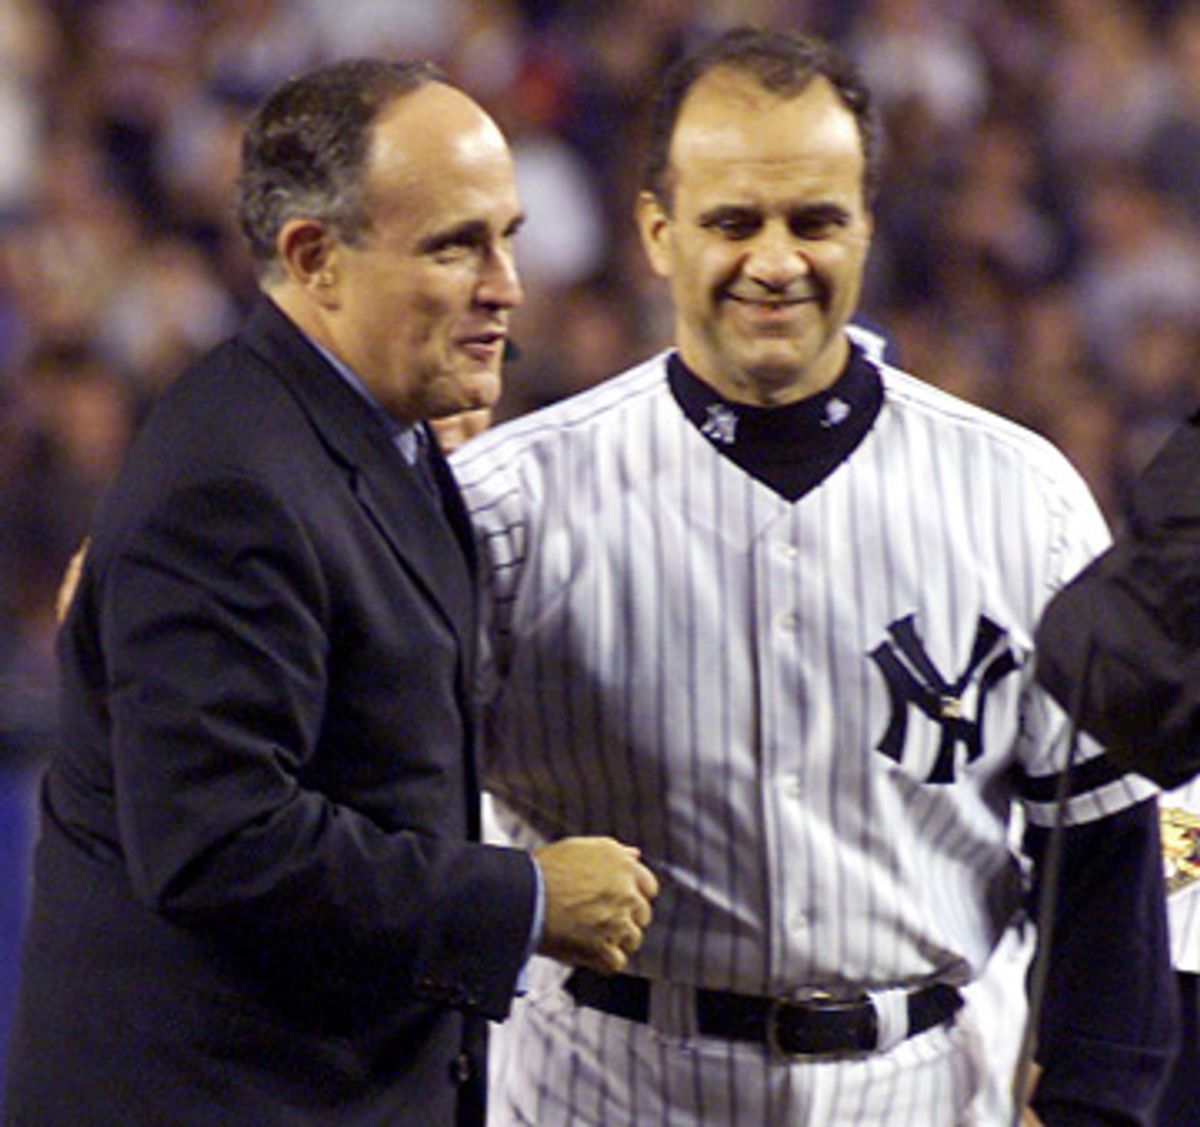 After 9/11, Rudy wasn't a rescue worker -- he was a Yankee